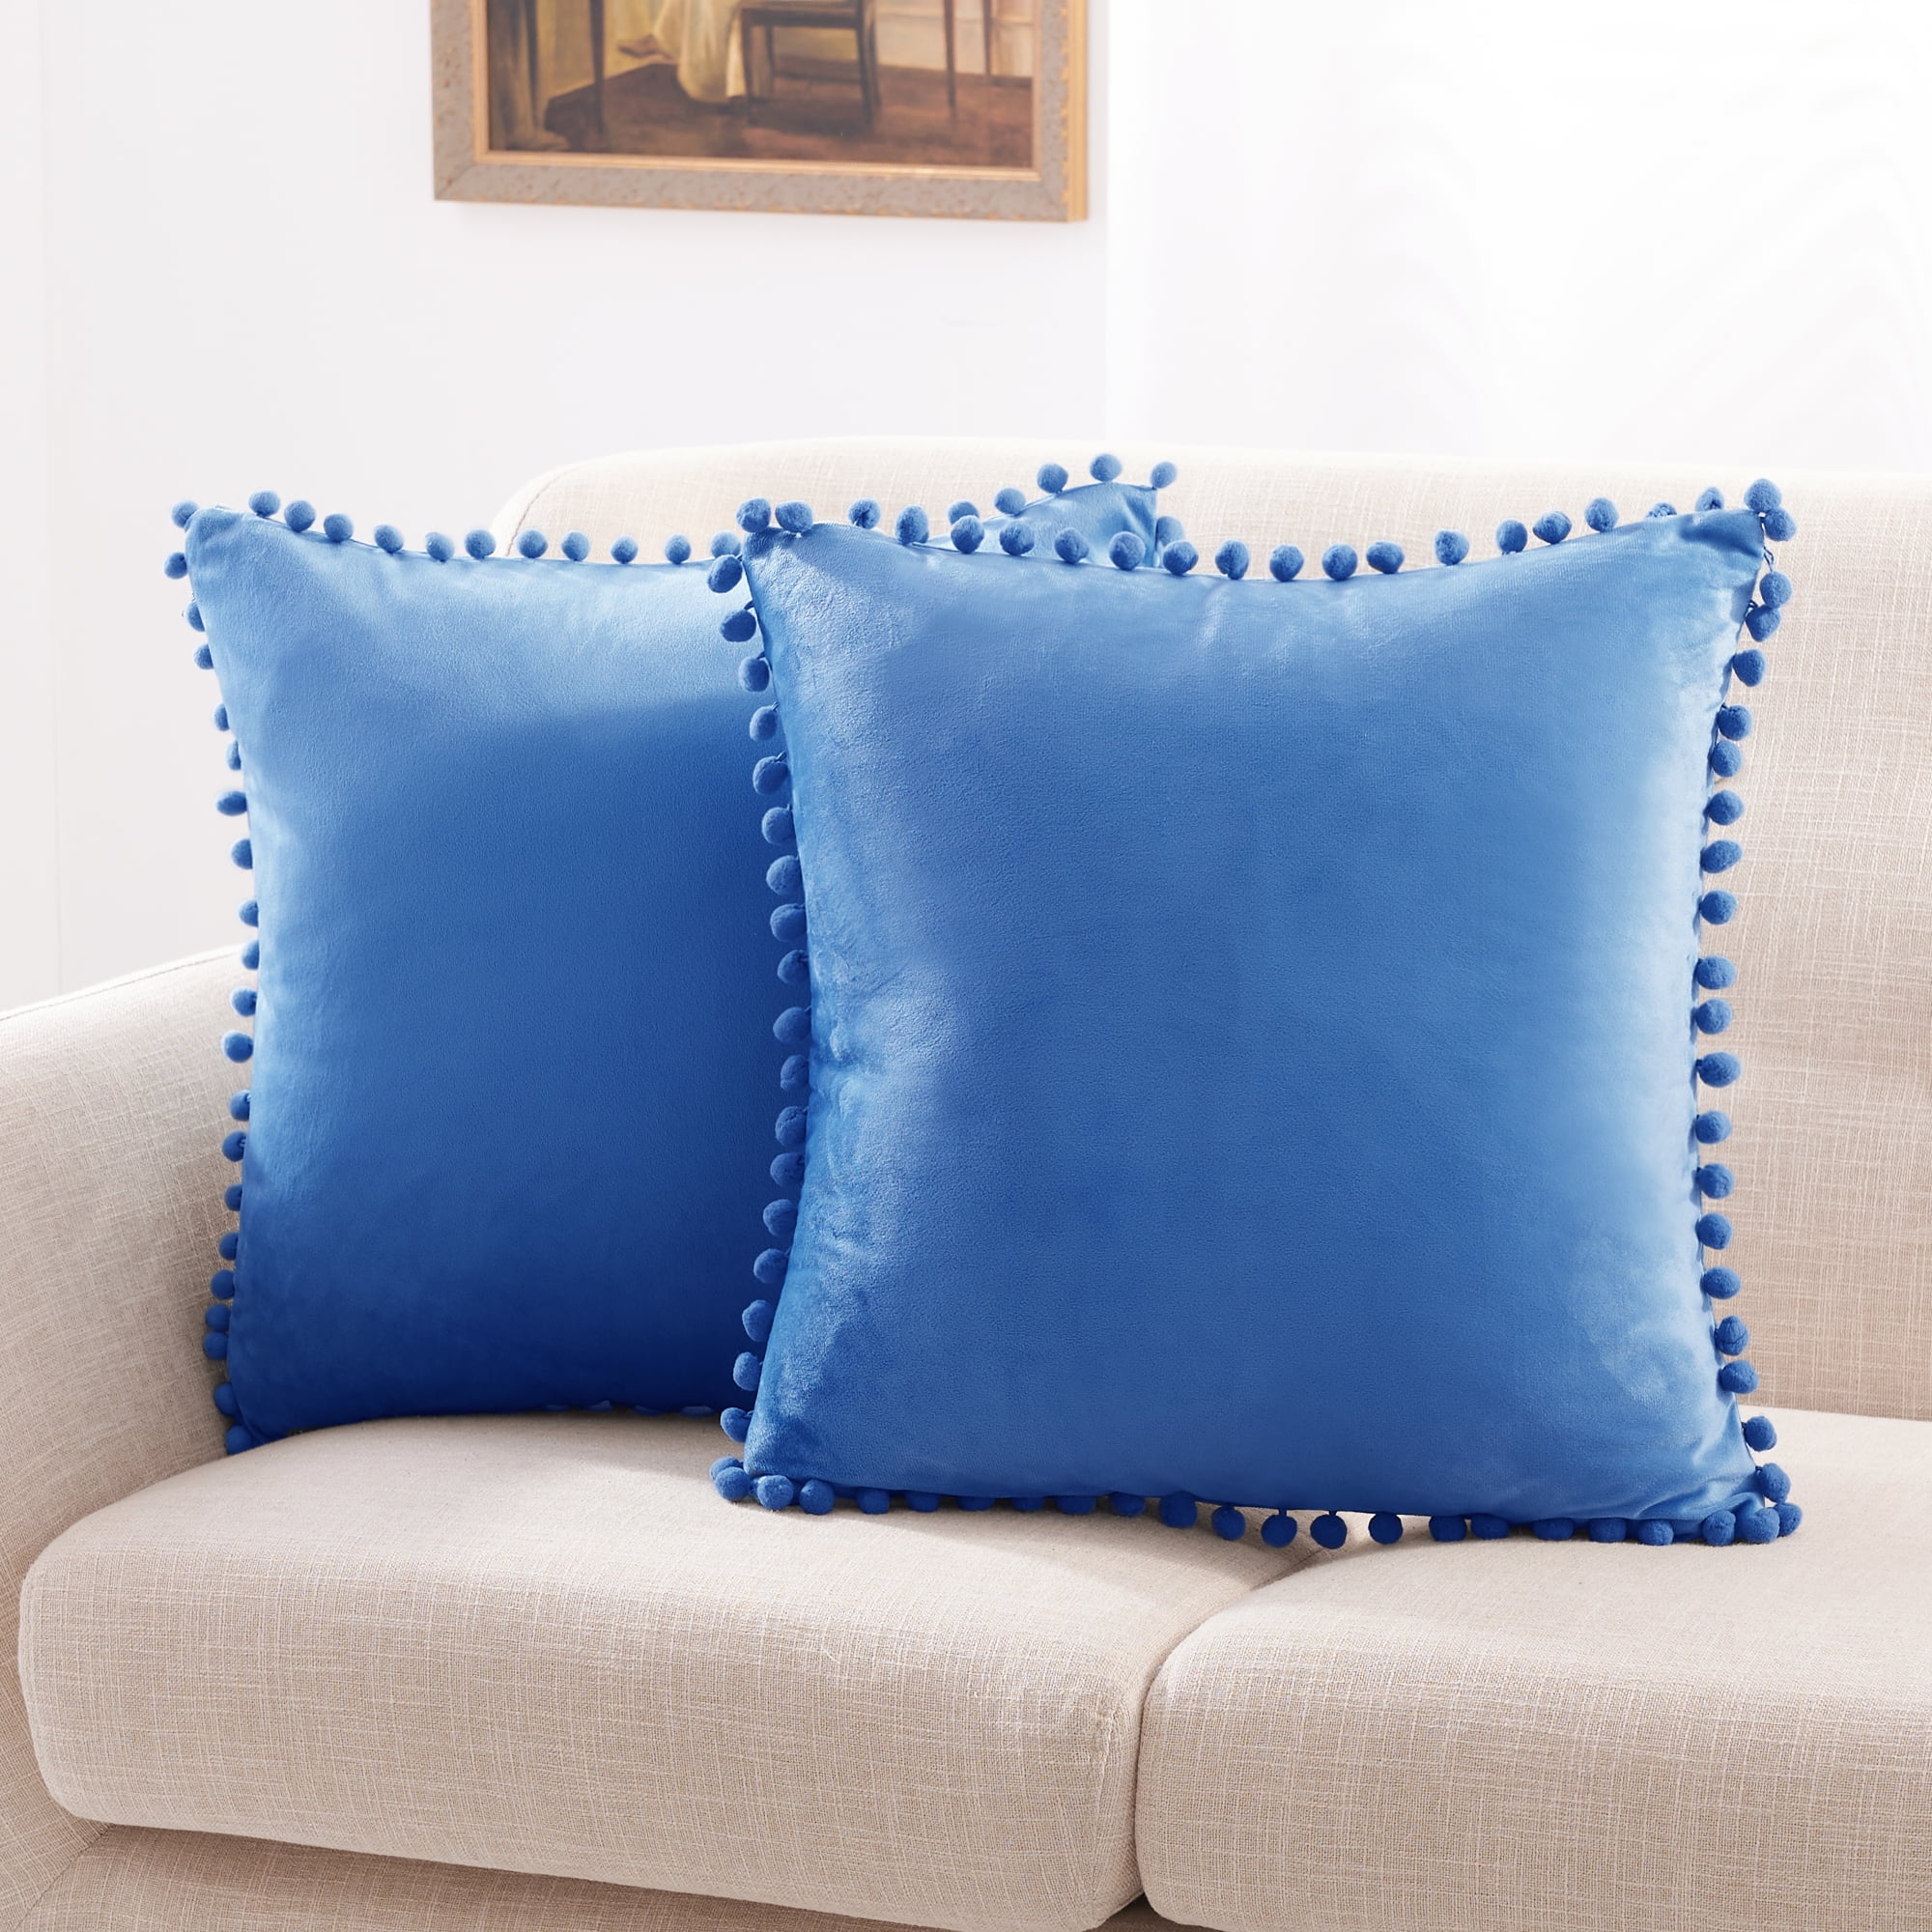 Piccocasa Sofa Couch Bed Chair Velvet Decors Luxury Euro Square Throw Pillow Cover Pale Blue 18 x 18